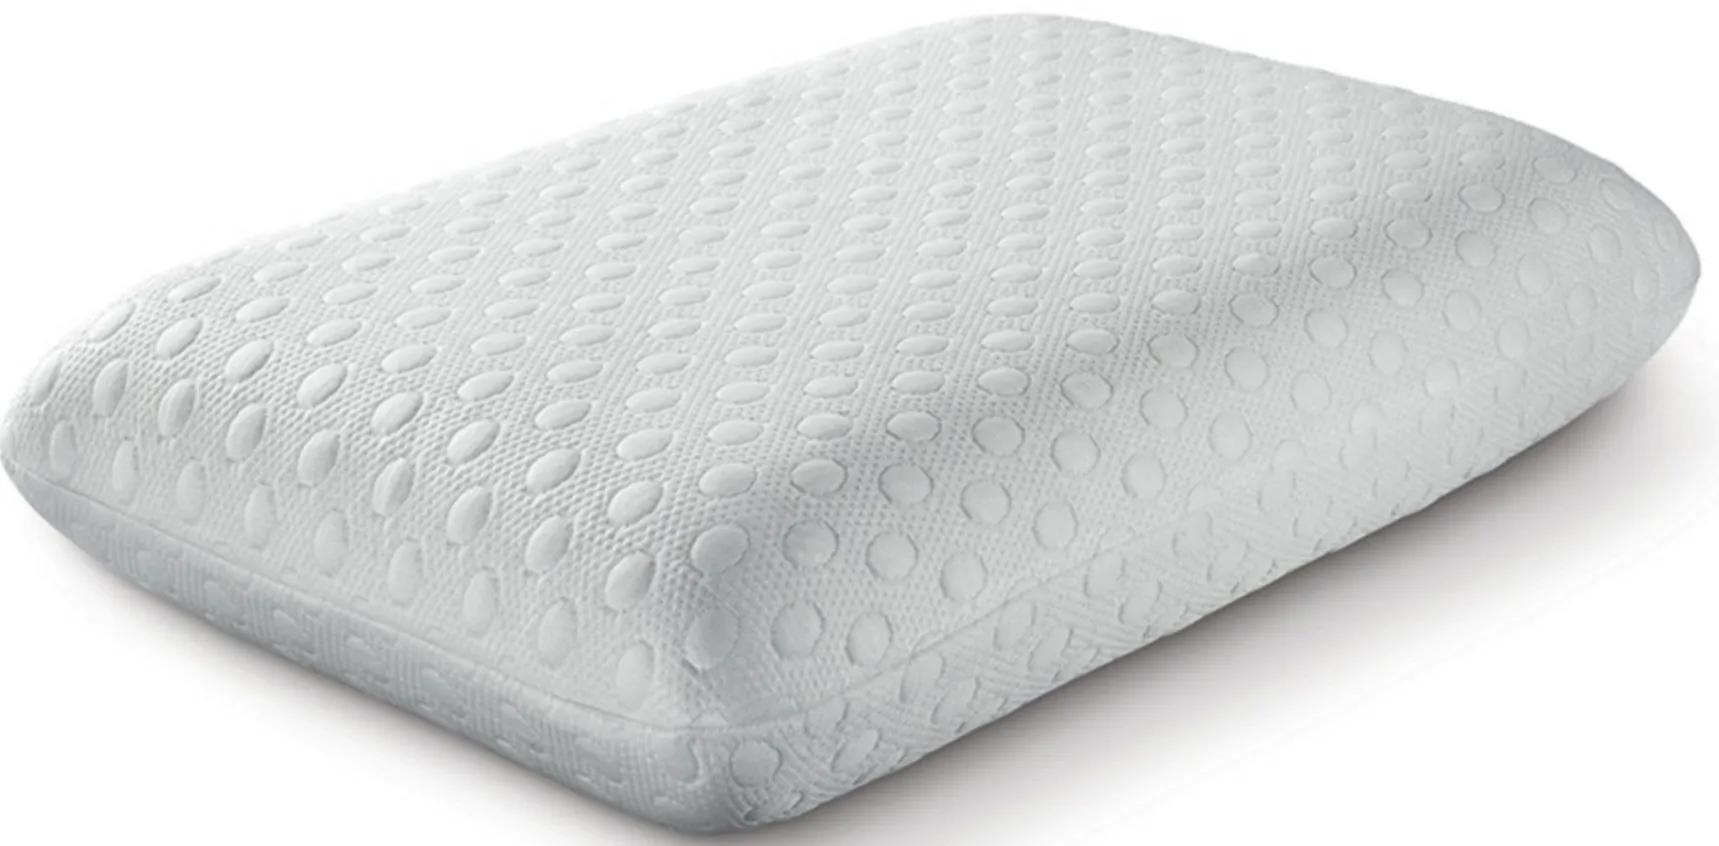 PureCare Cooling Memory Foam Pillow in White by PureCare